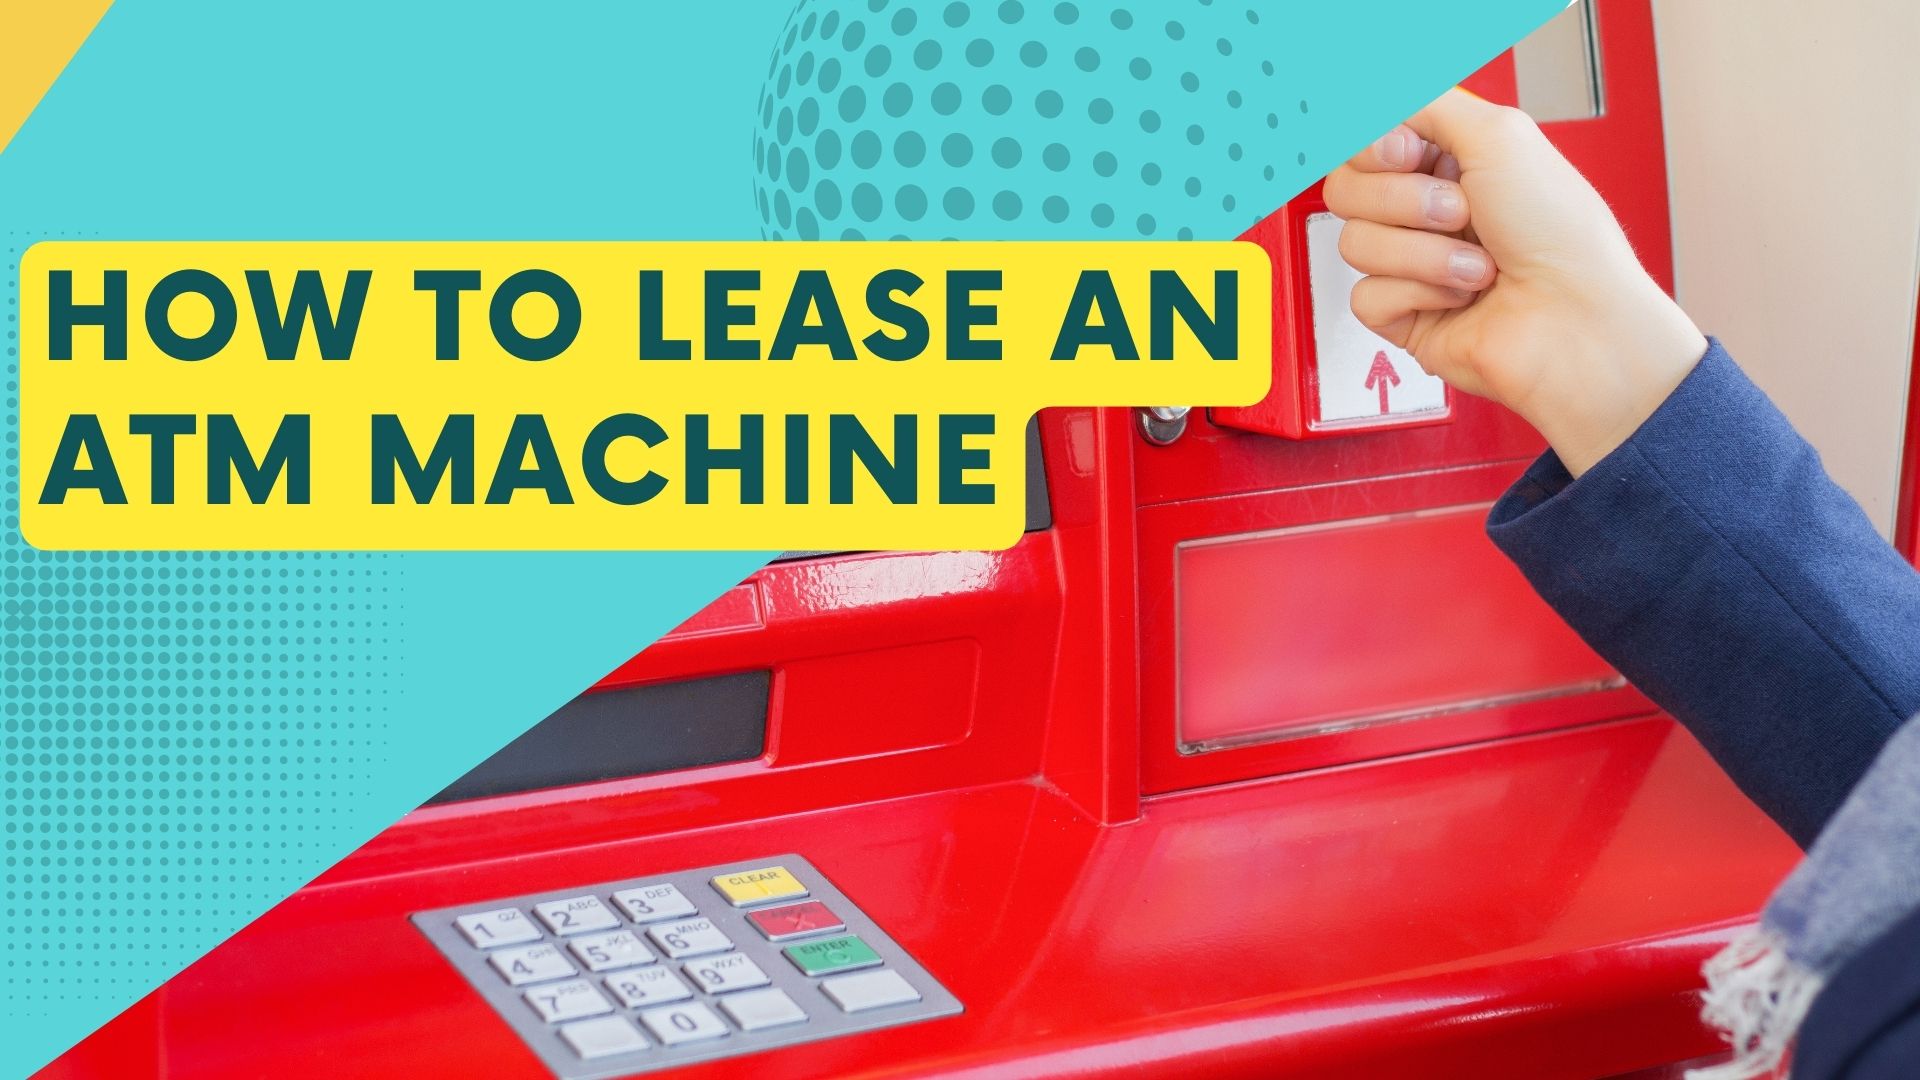 How to Lease an ATM Machine